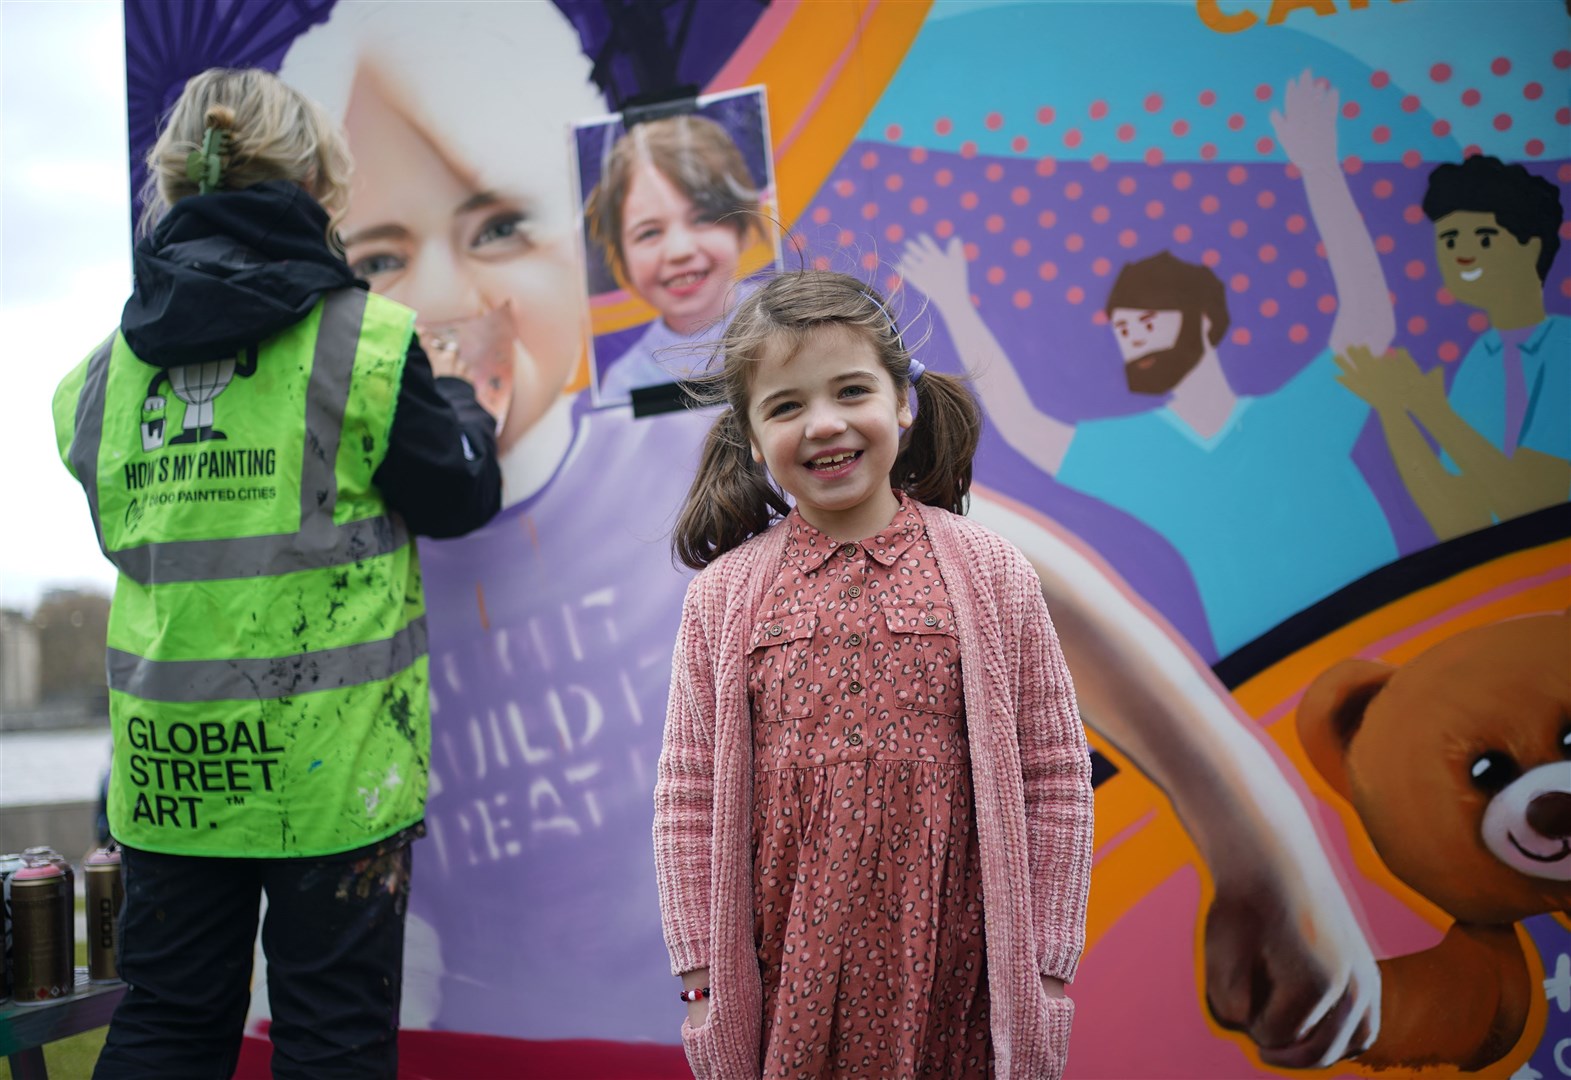 Six-year-old Sienna Halls, from Ruislip in London, next to an 8ft mural at Potters Fields Park in London (Yui Mok/PA)